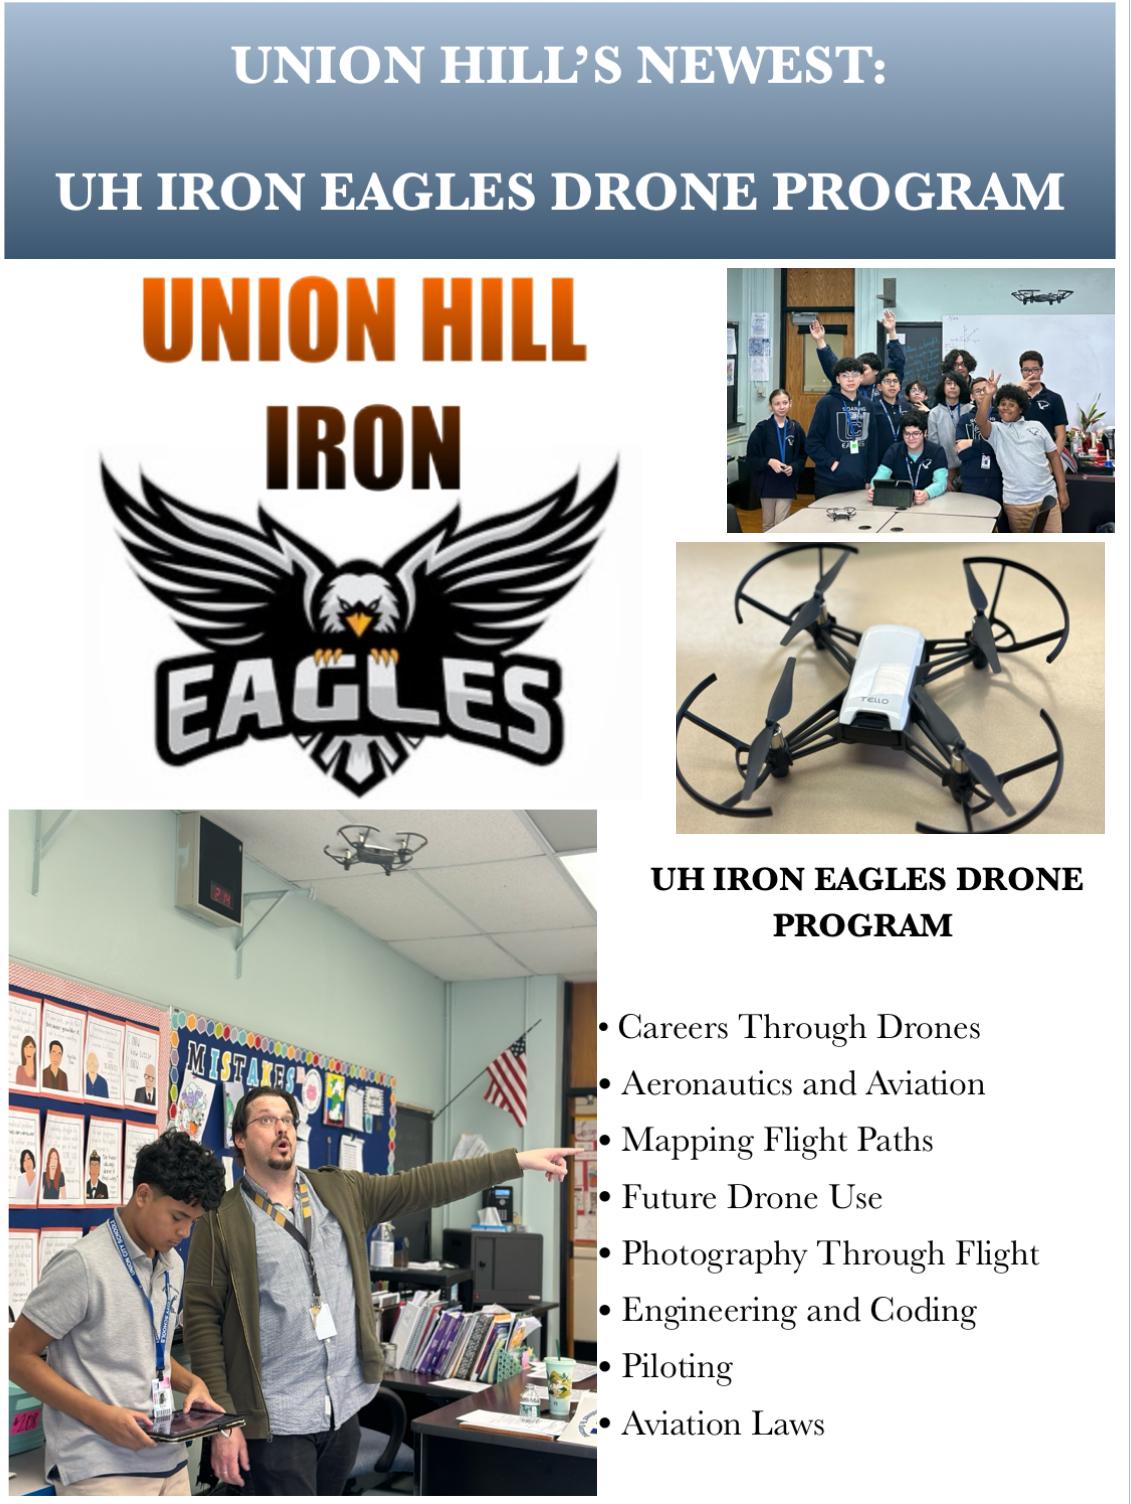 The Union Hill Middle School Iron Eagles Drone Program Flyer